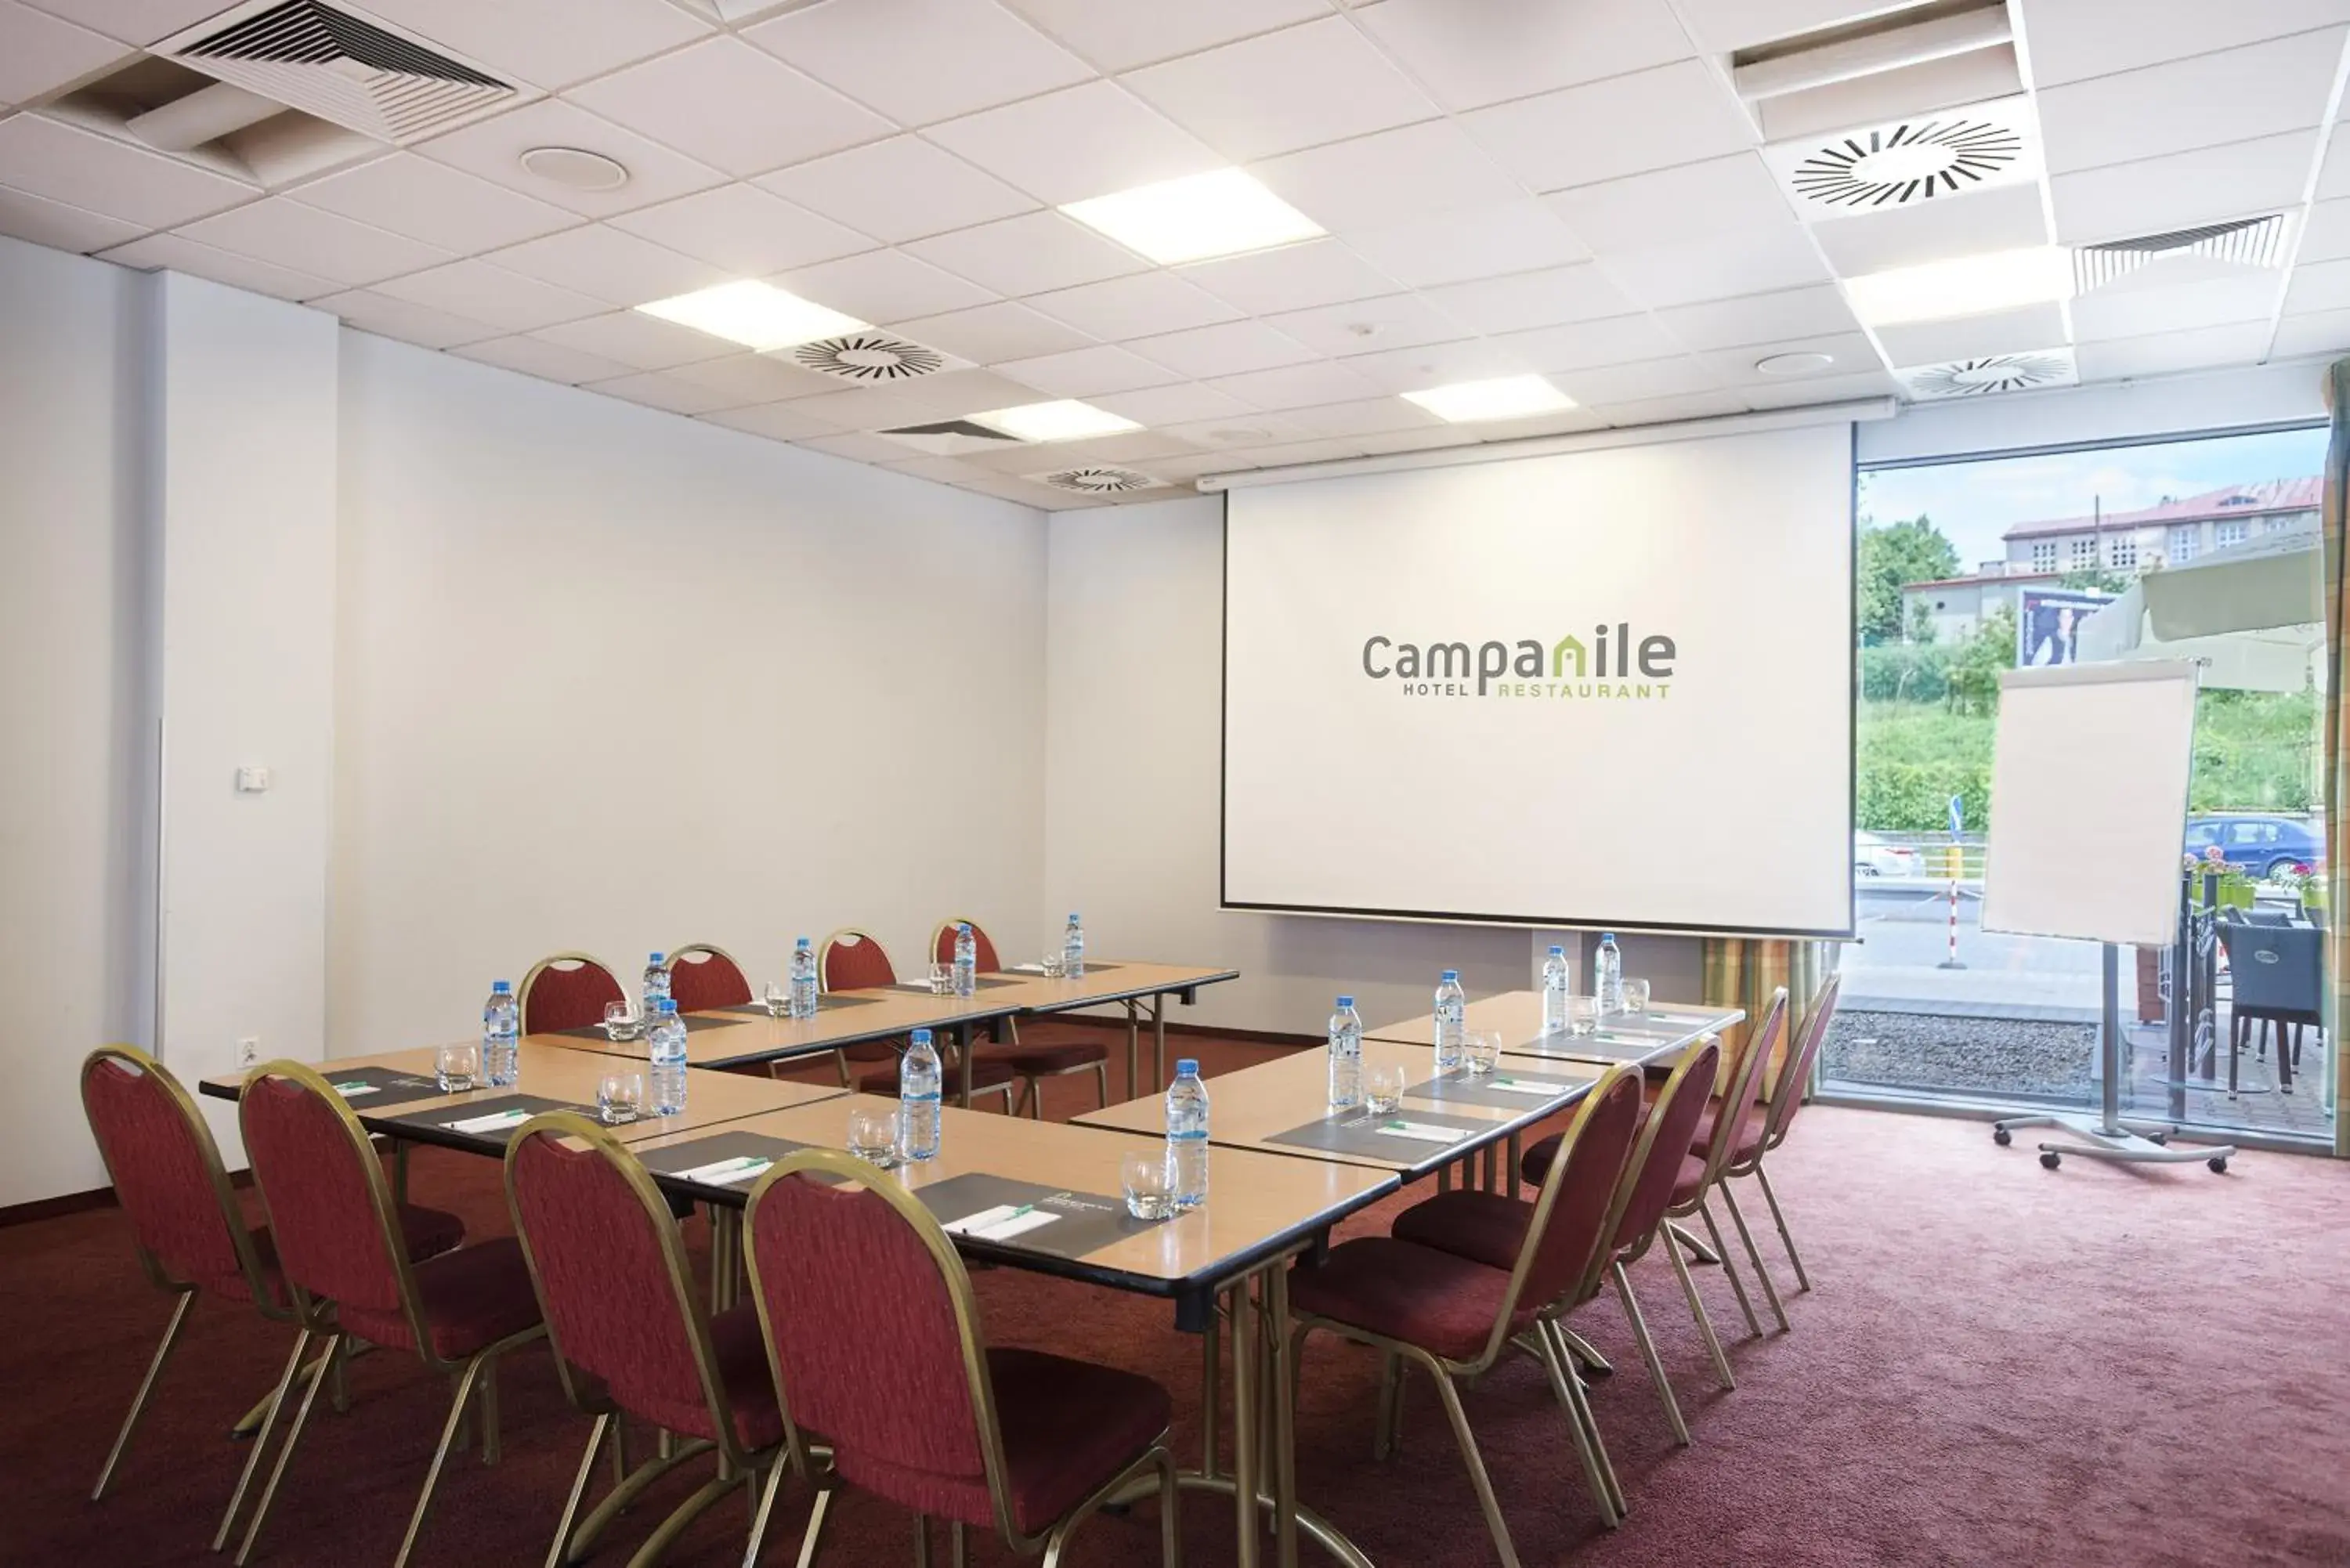 Meeting/conference room in Campanile Hotel Lublin